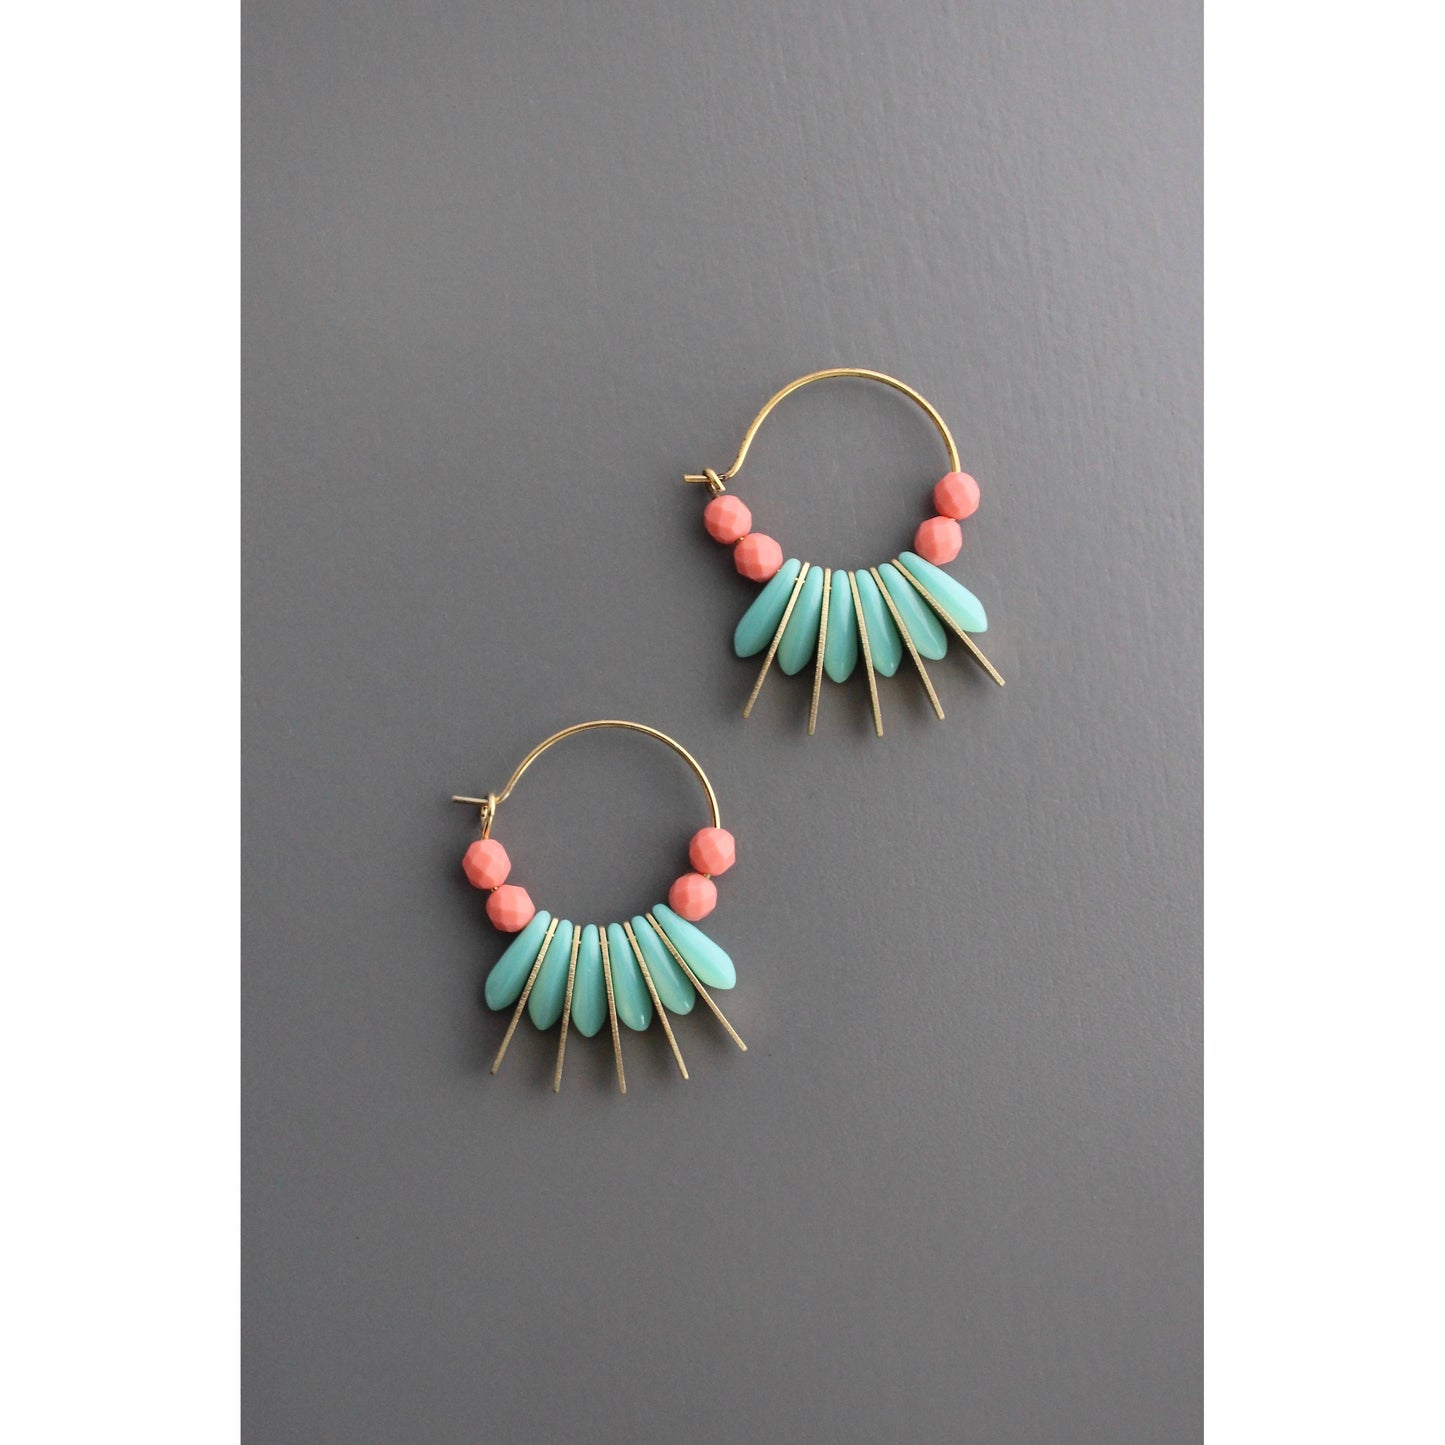 David Aubrey Jewelry - EMIE07 Turquoise and coral glass small hoop earrings